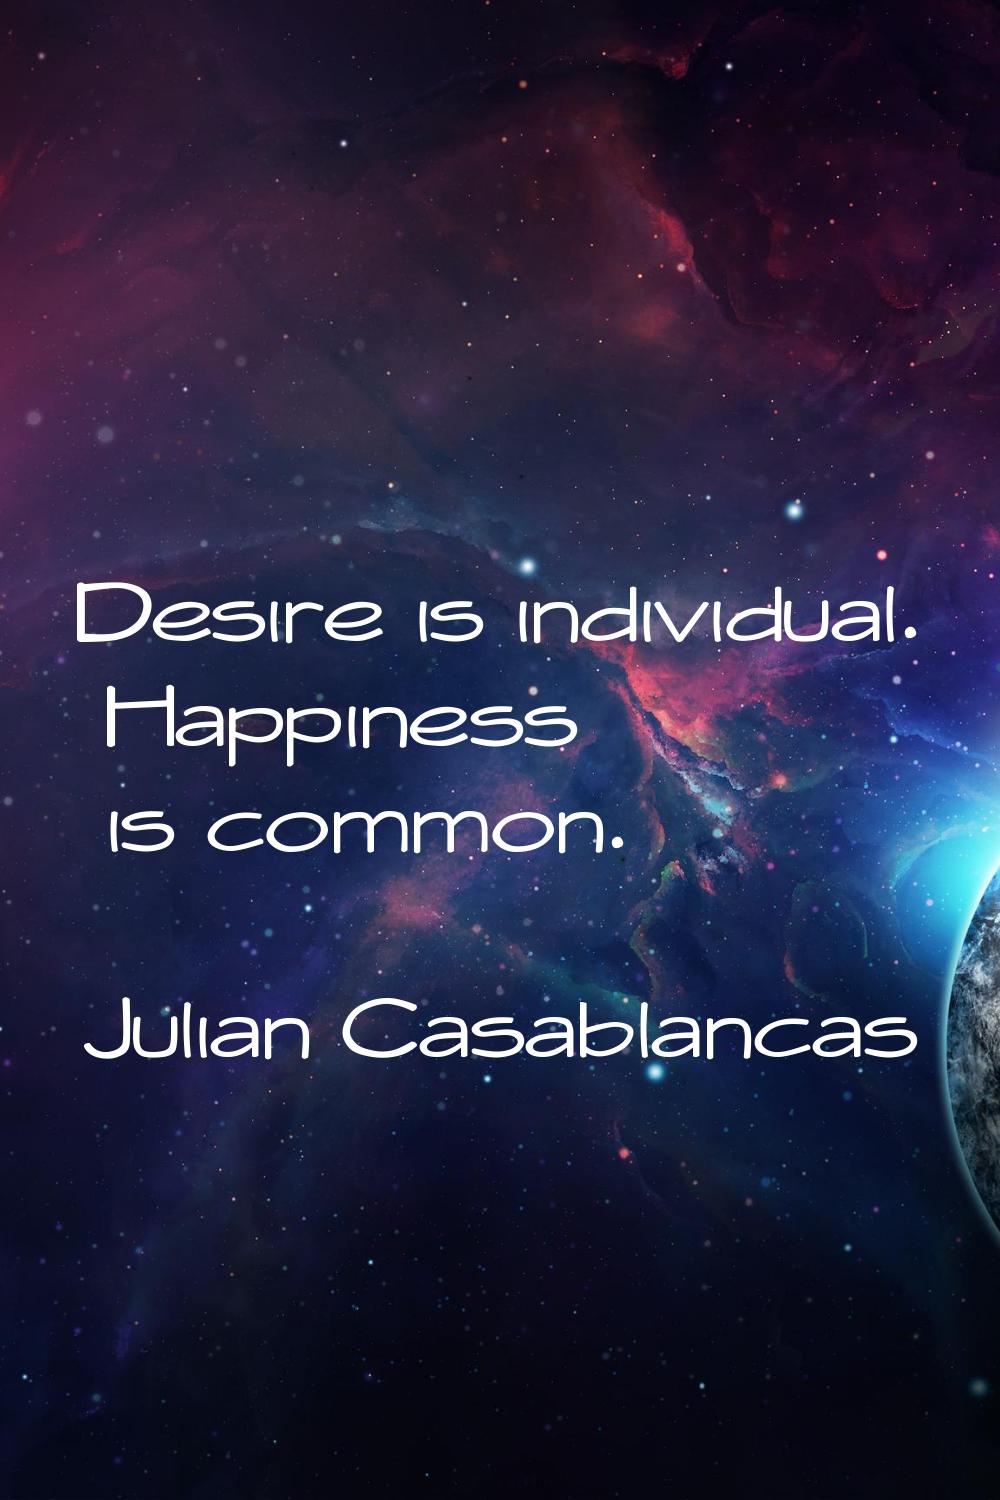 Desire is individual. Happiness is common.